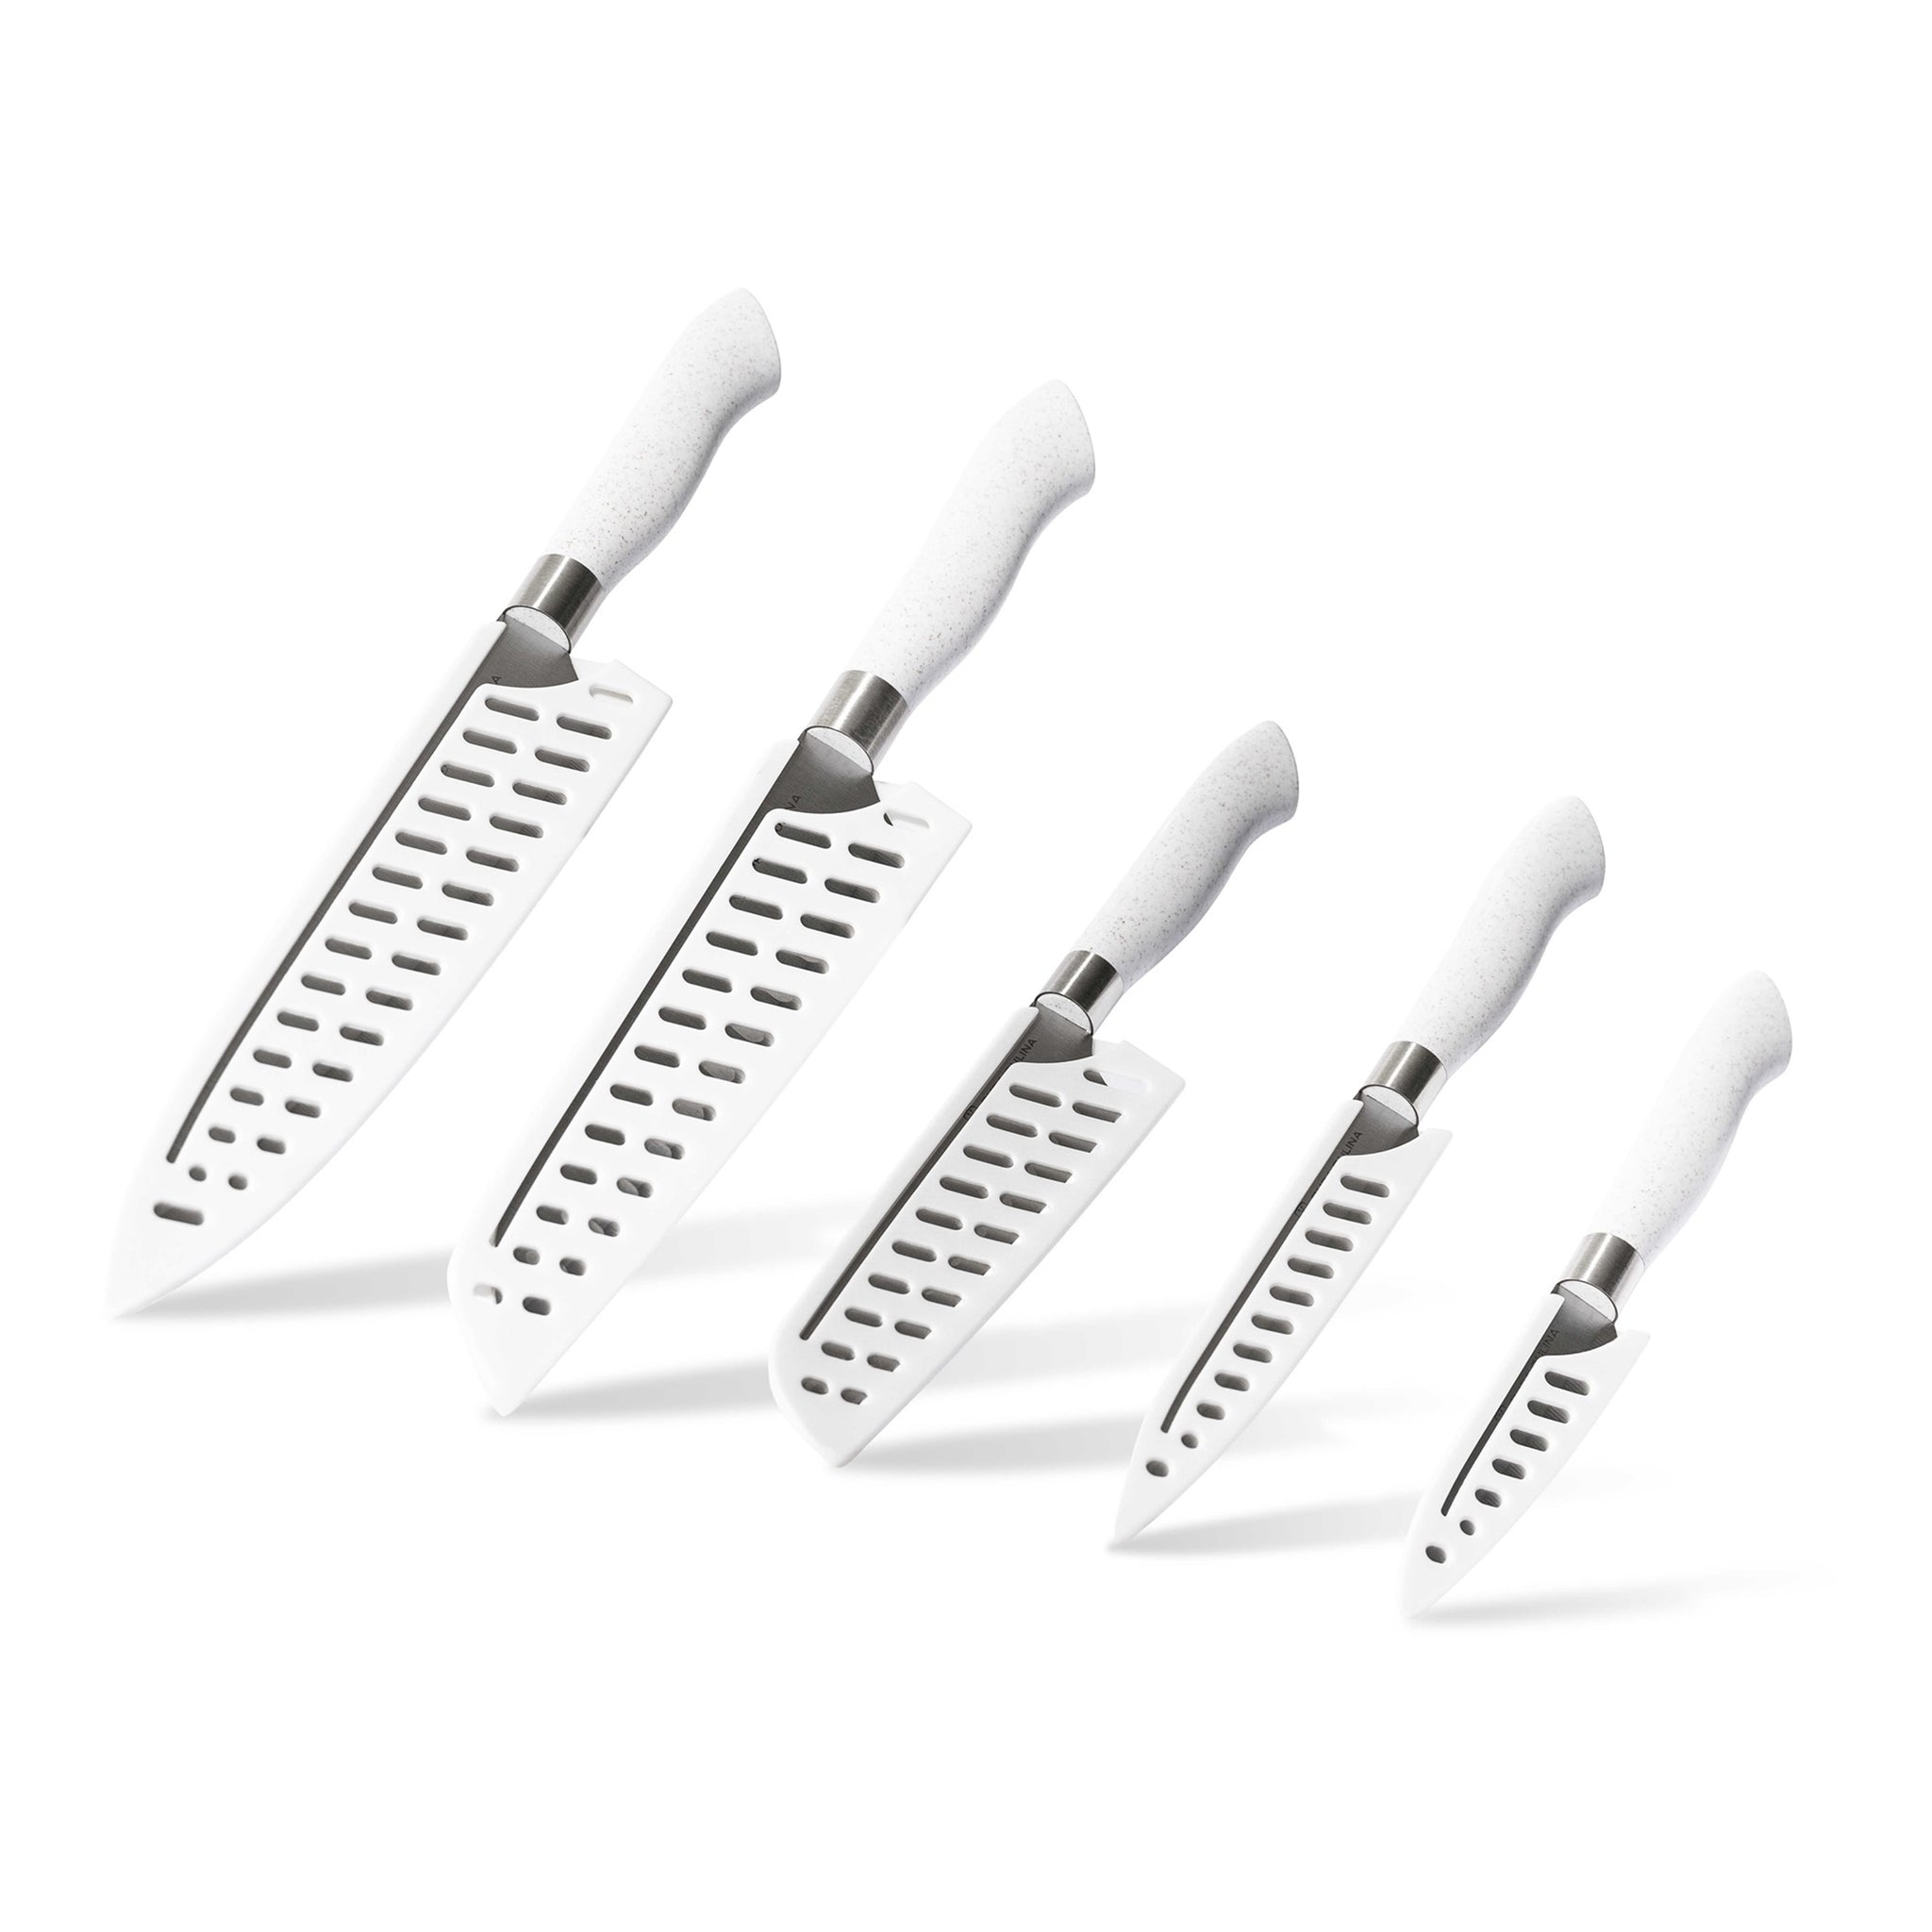 EcoCut 10 Piece Kitchen Knife Set With Blade Guards, Grey